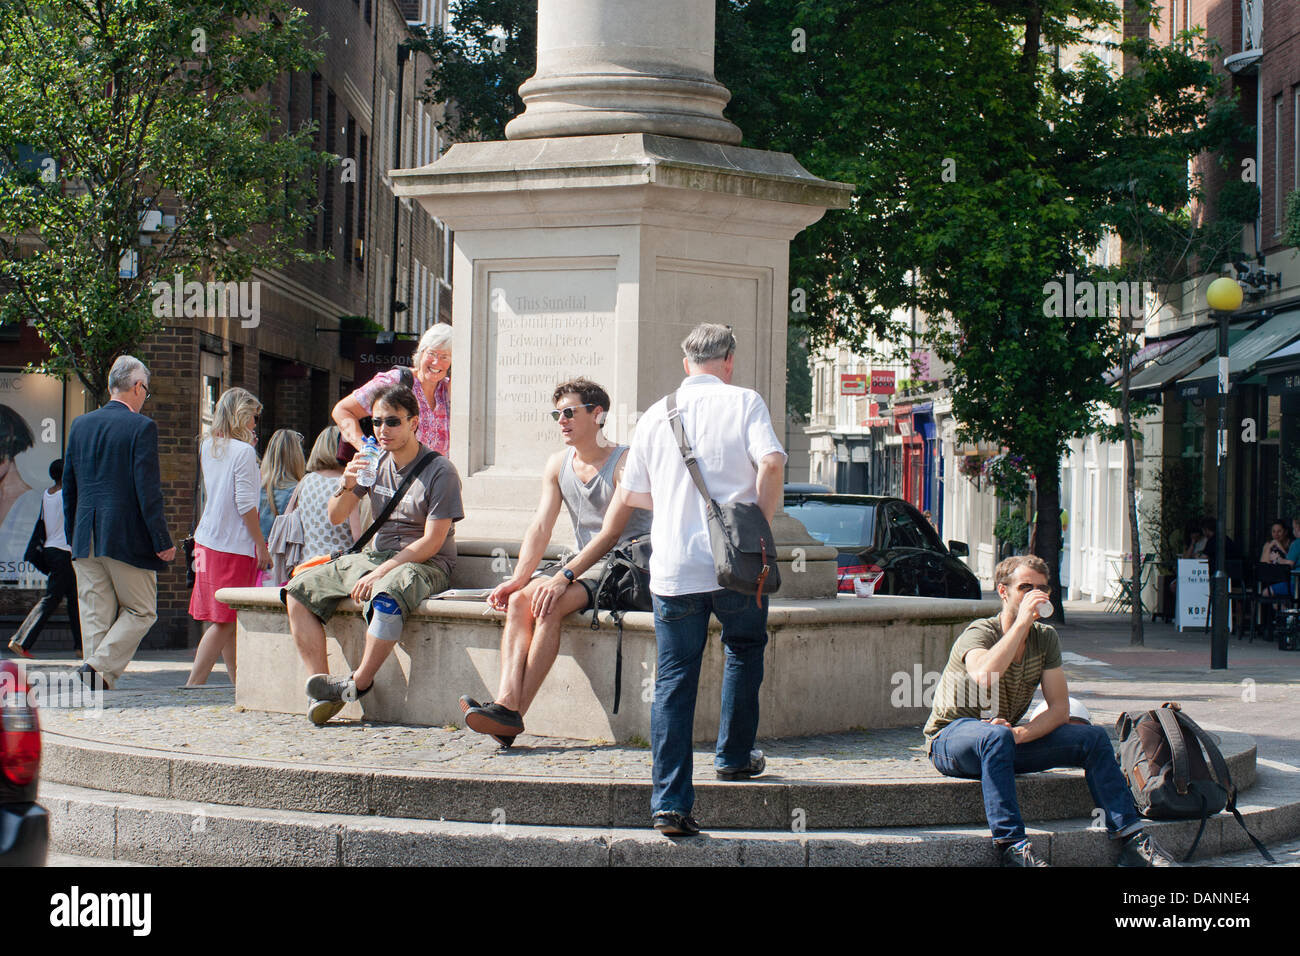 London, UK. 13/07/2013. Londoners enjoying the hot weather, at Seven Dials Monument in Covent Garden . Peter Barbe / Alamy Stock Photo